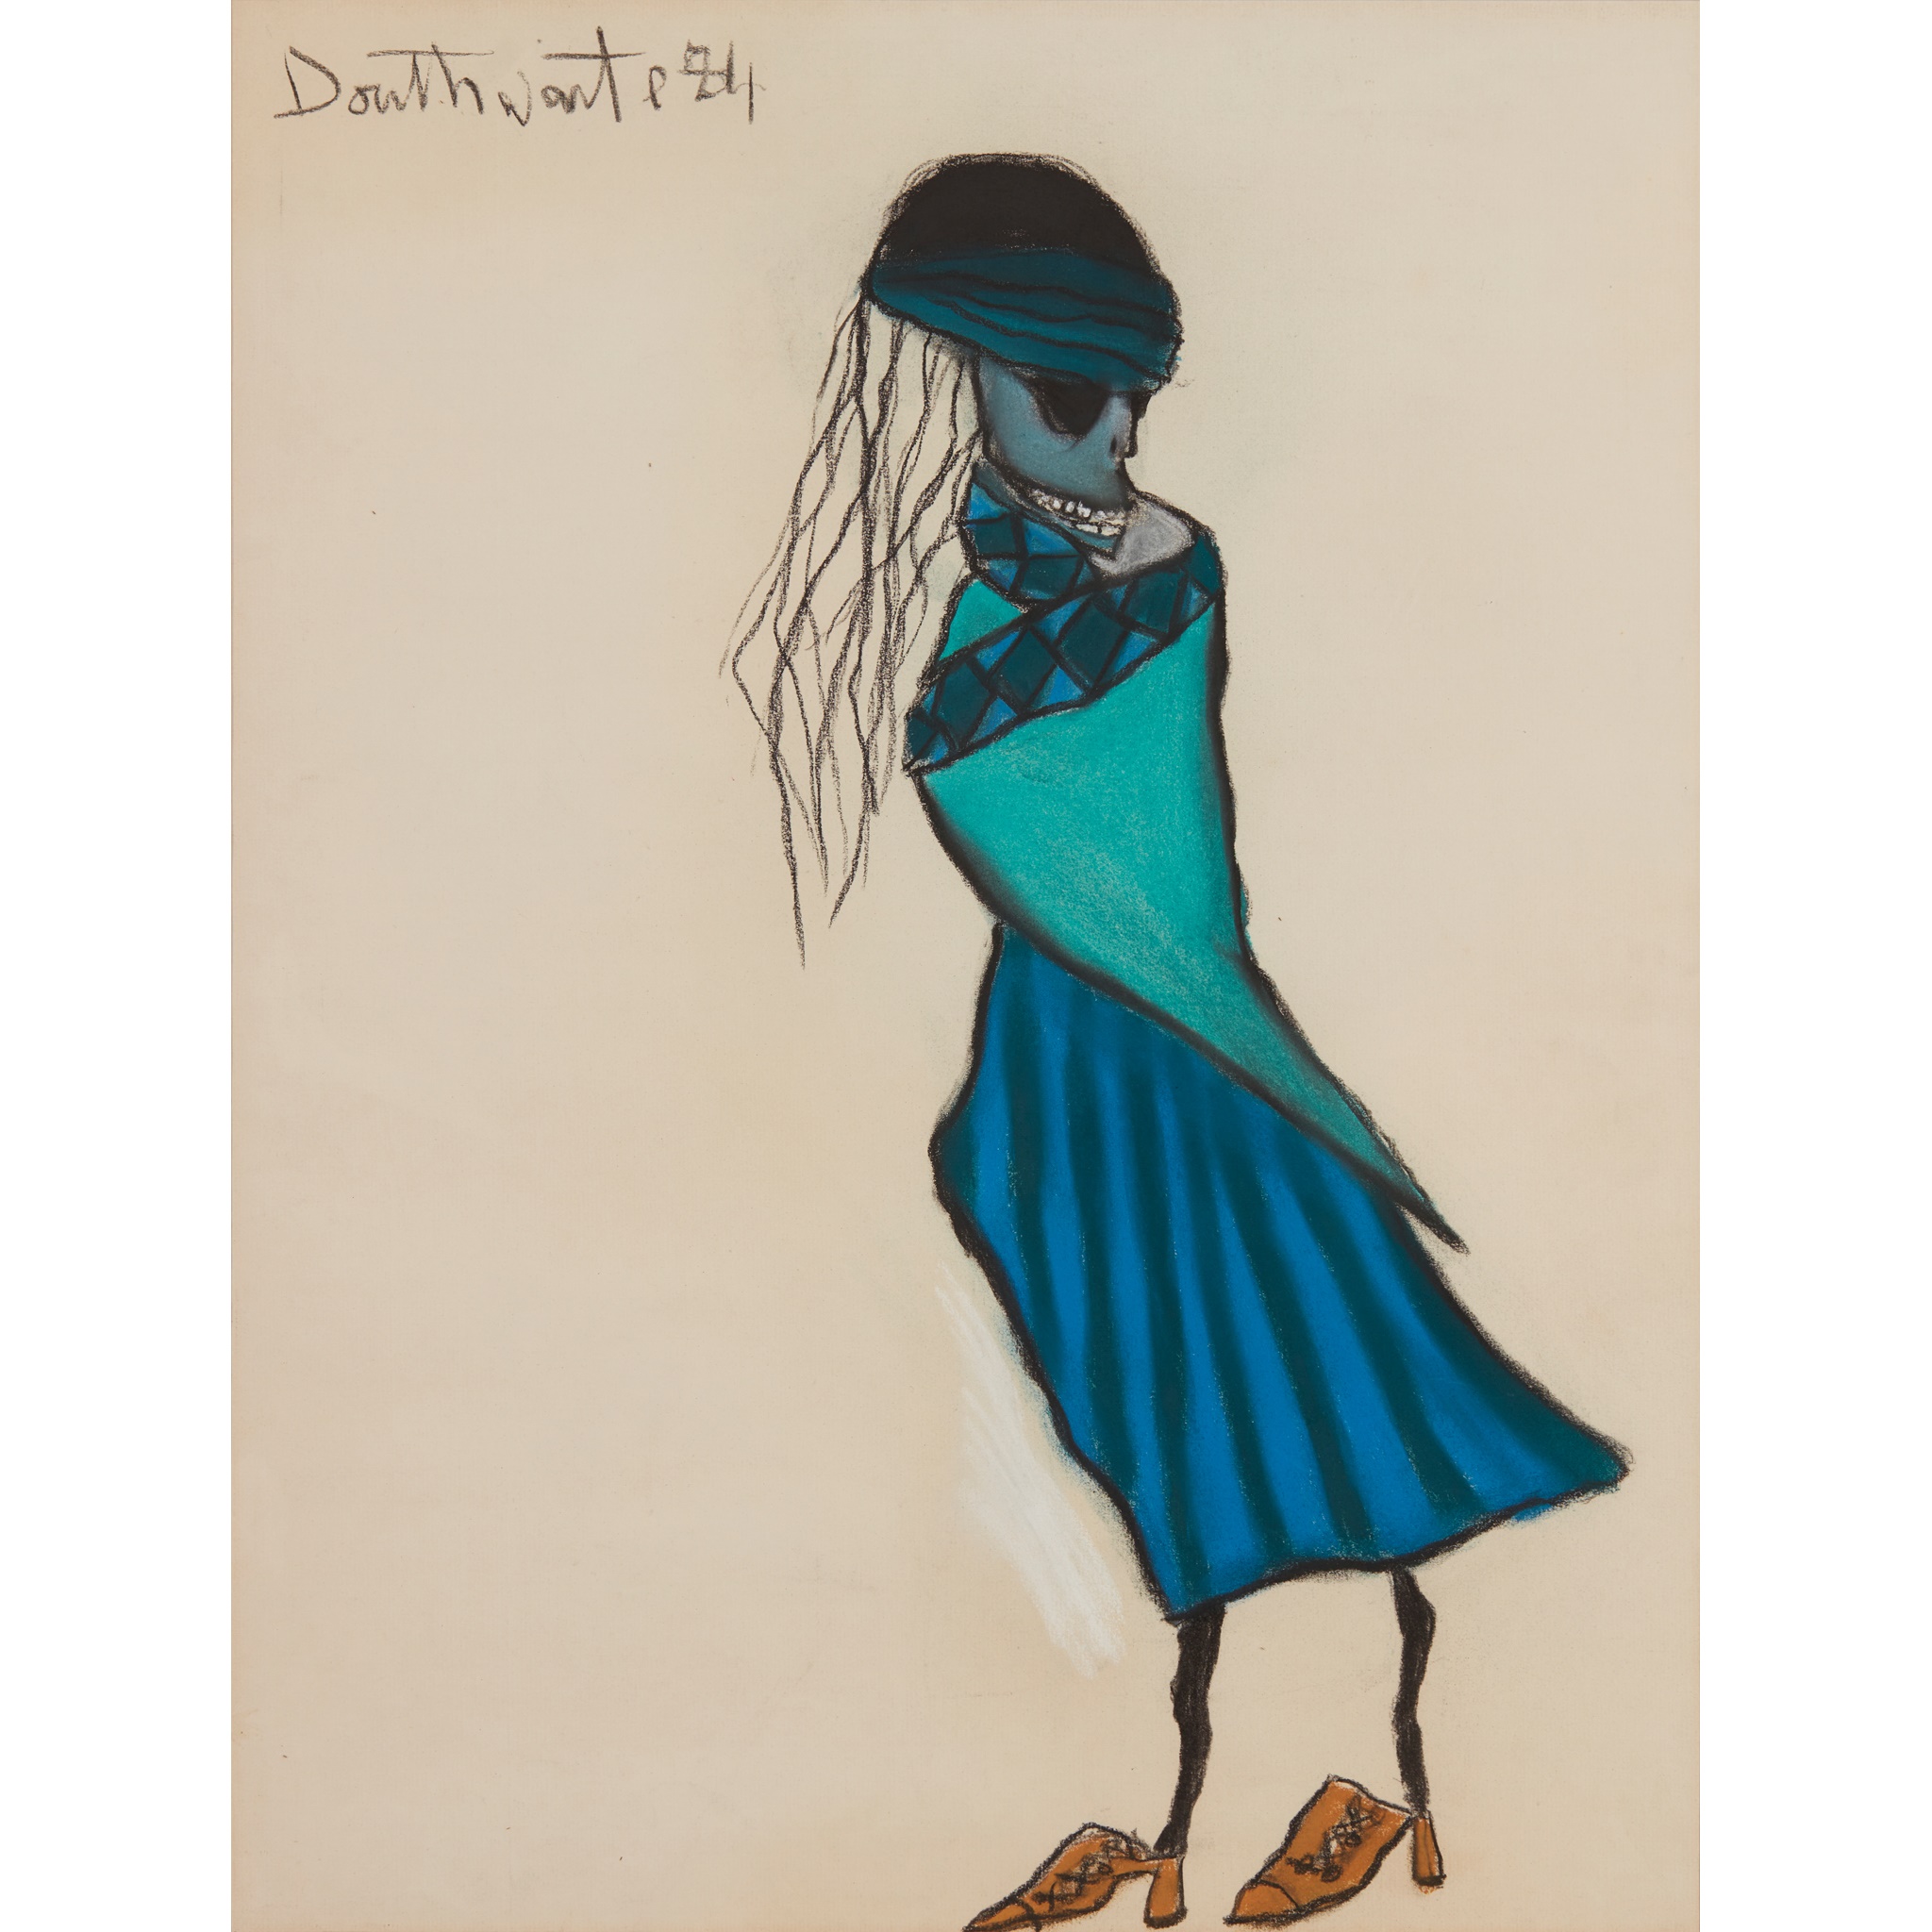 PATRICIA DOUTHWAITE (SCOTTISH 1939-2002) | DEATH IN DIEPPE (FROM THE GWEN JOHN SERIES) - 1984 | £1,200 - £1,800 + fees